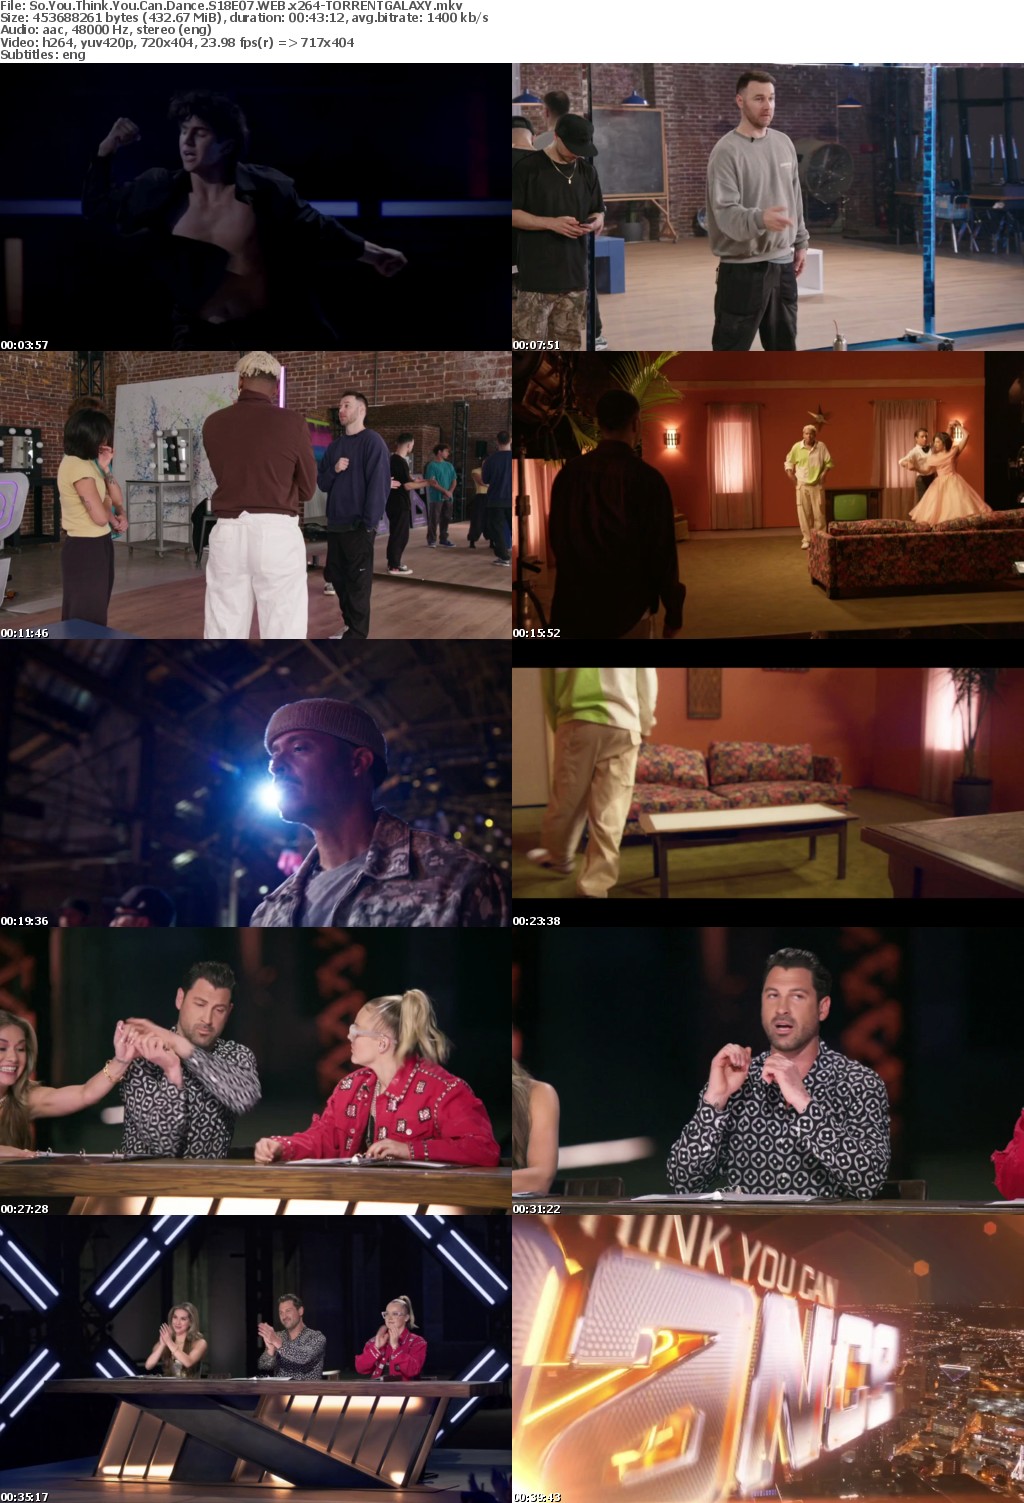 So You Think You Can Dance S18E07 WEB x264-GALAXY